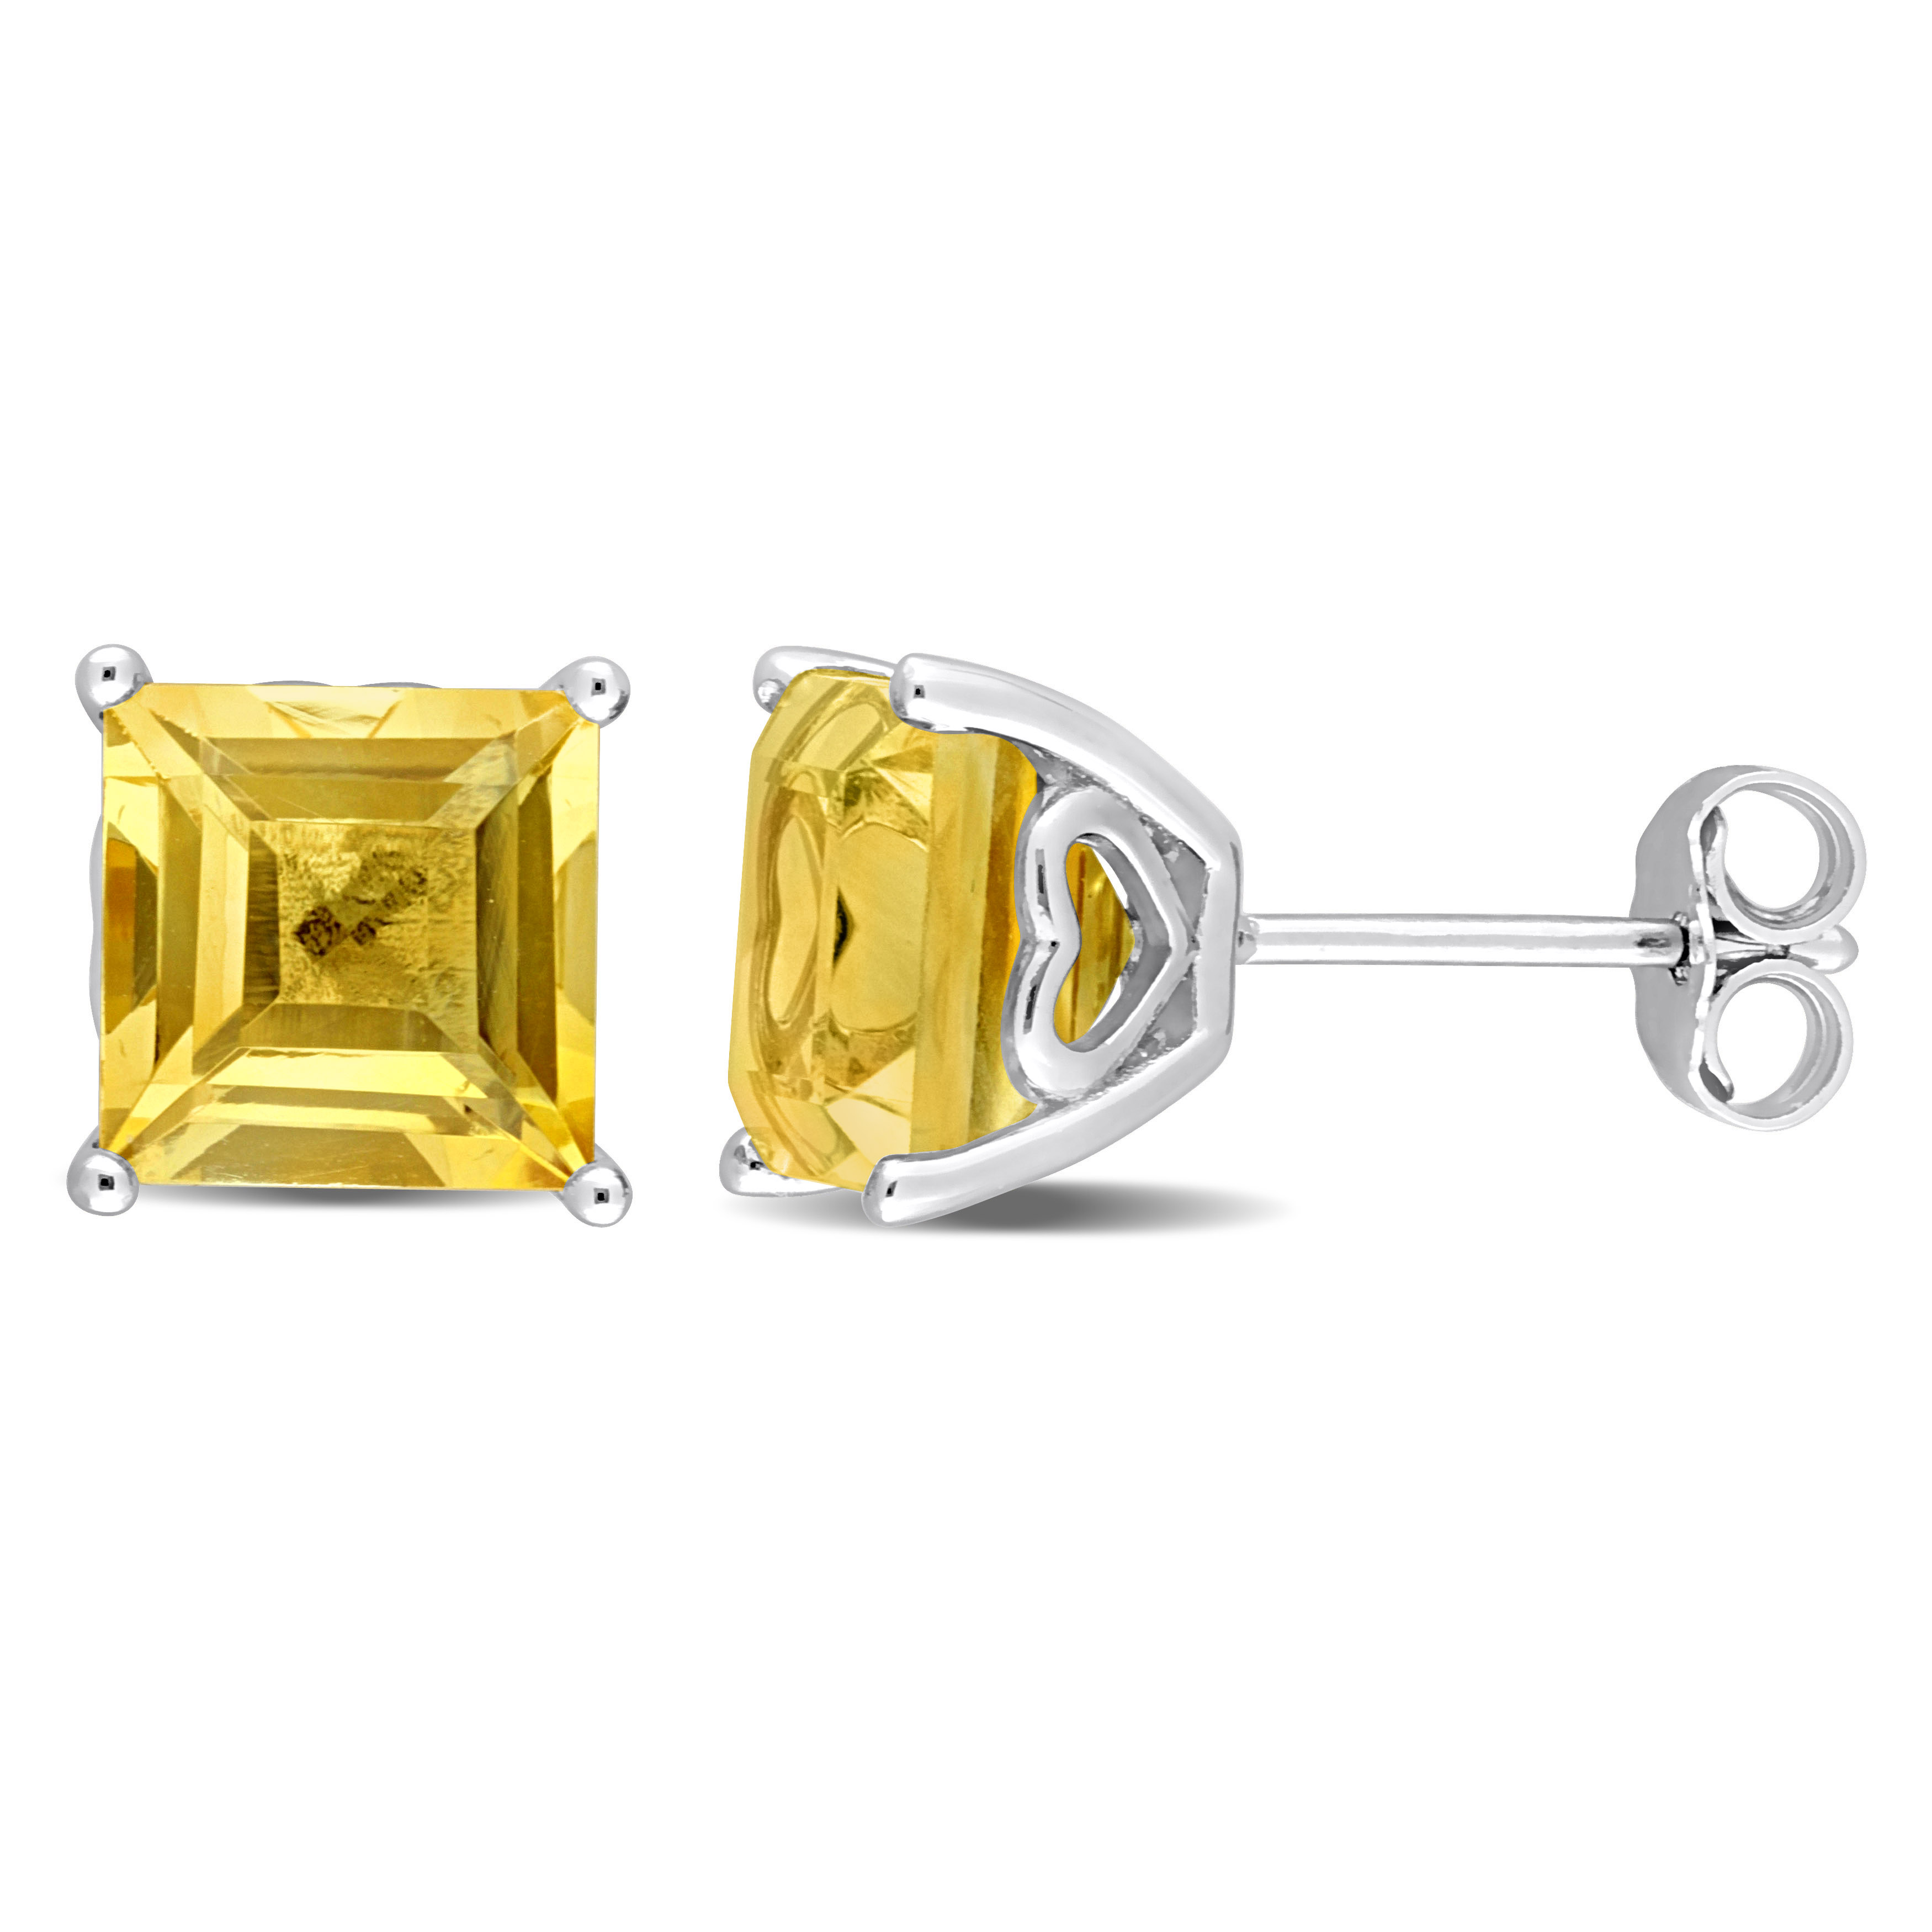 4 4/5 CT TGW Square Citrine Fashion Stud Earrings in Sterling Silver